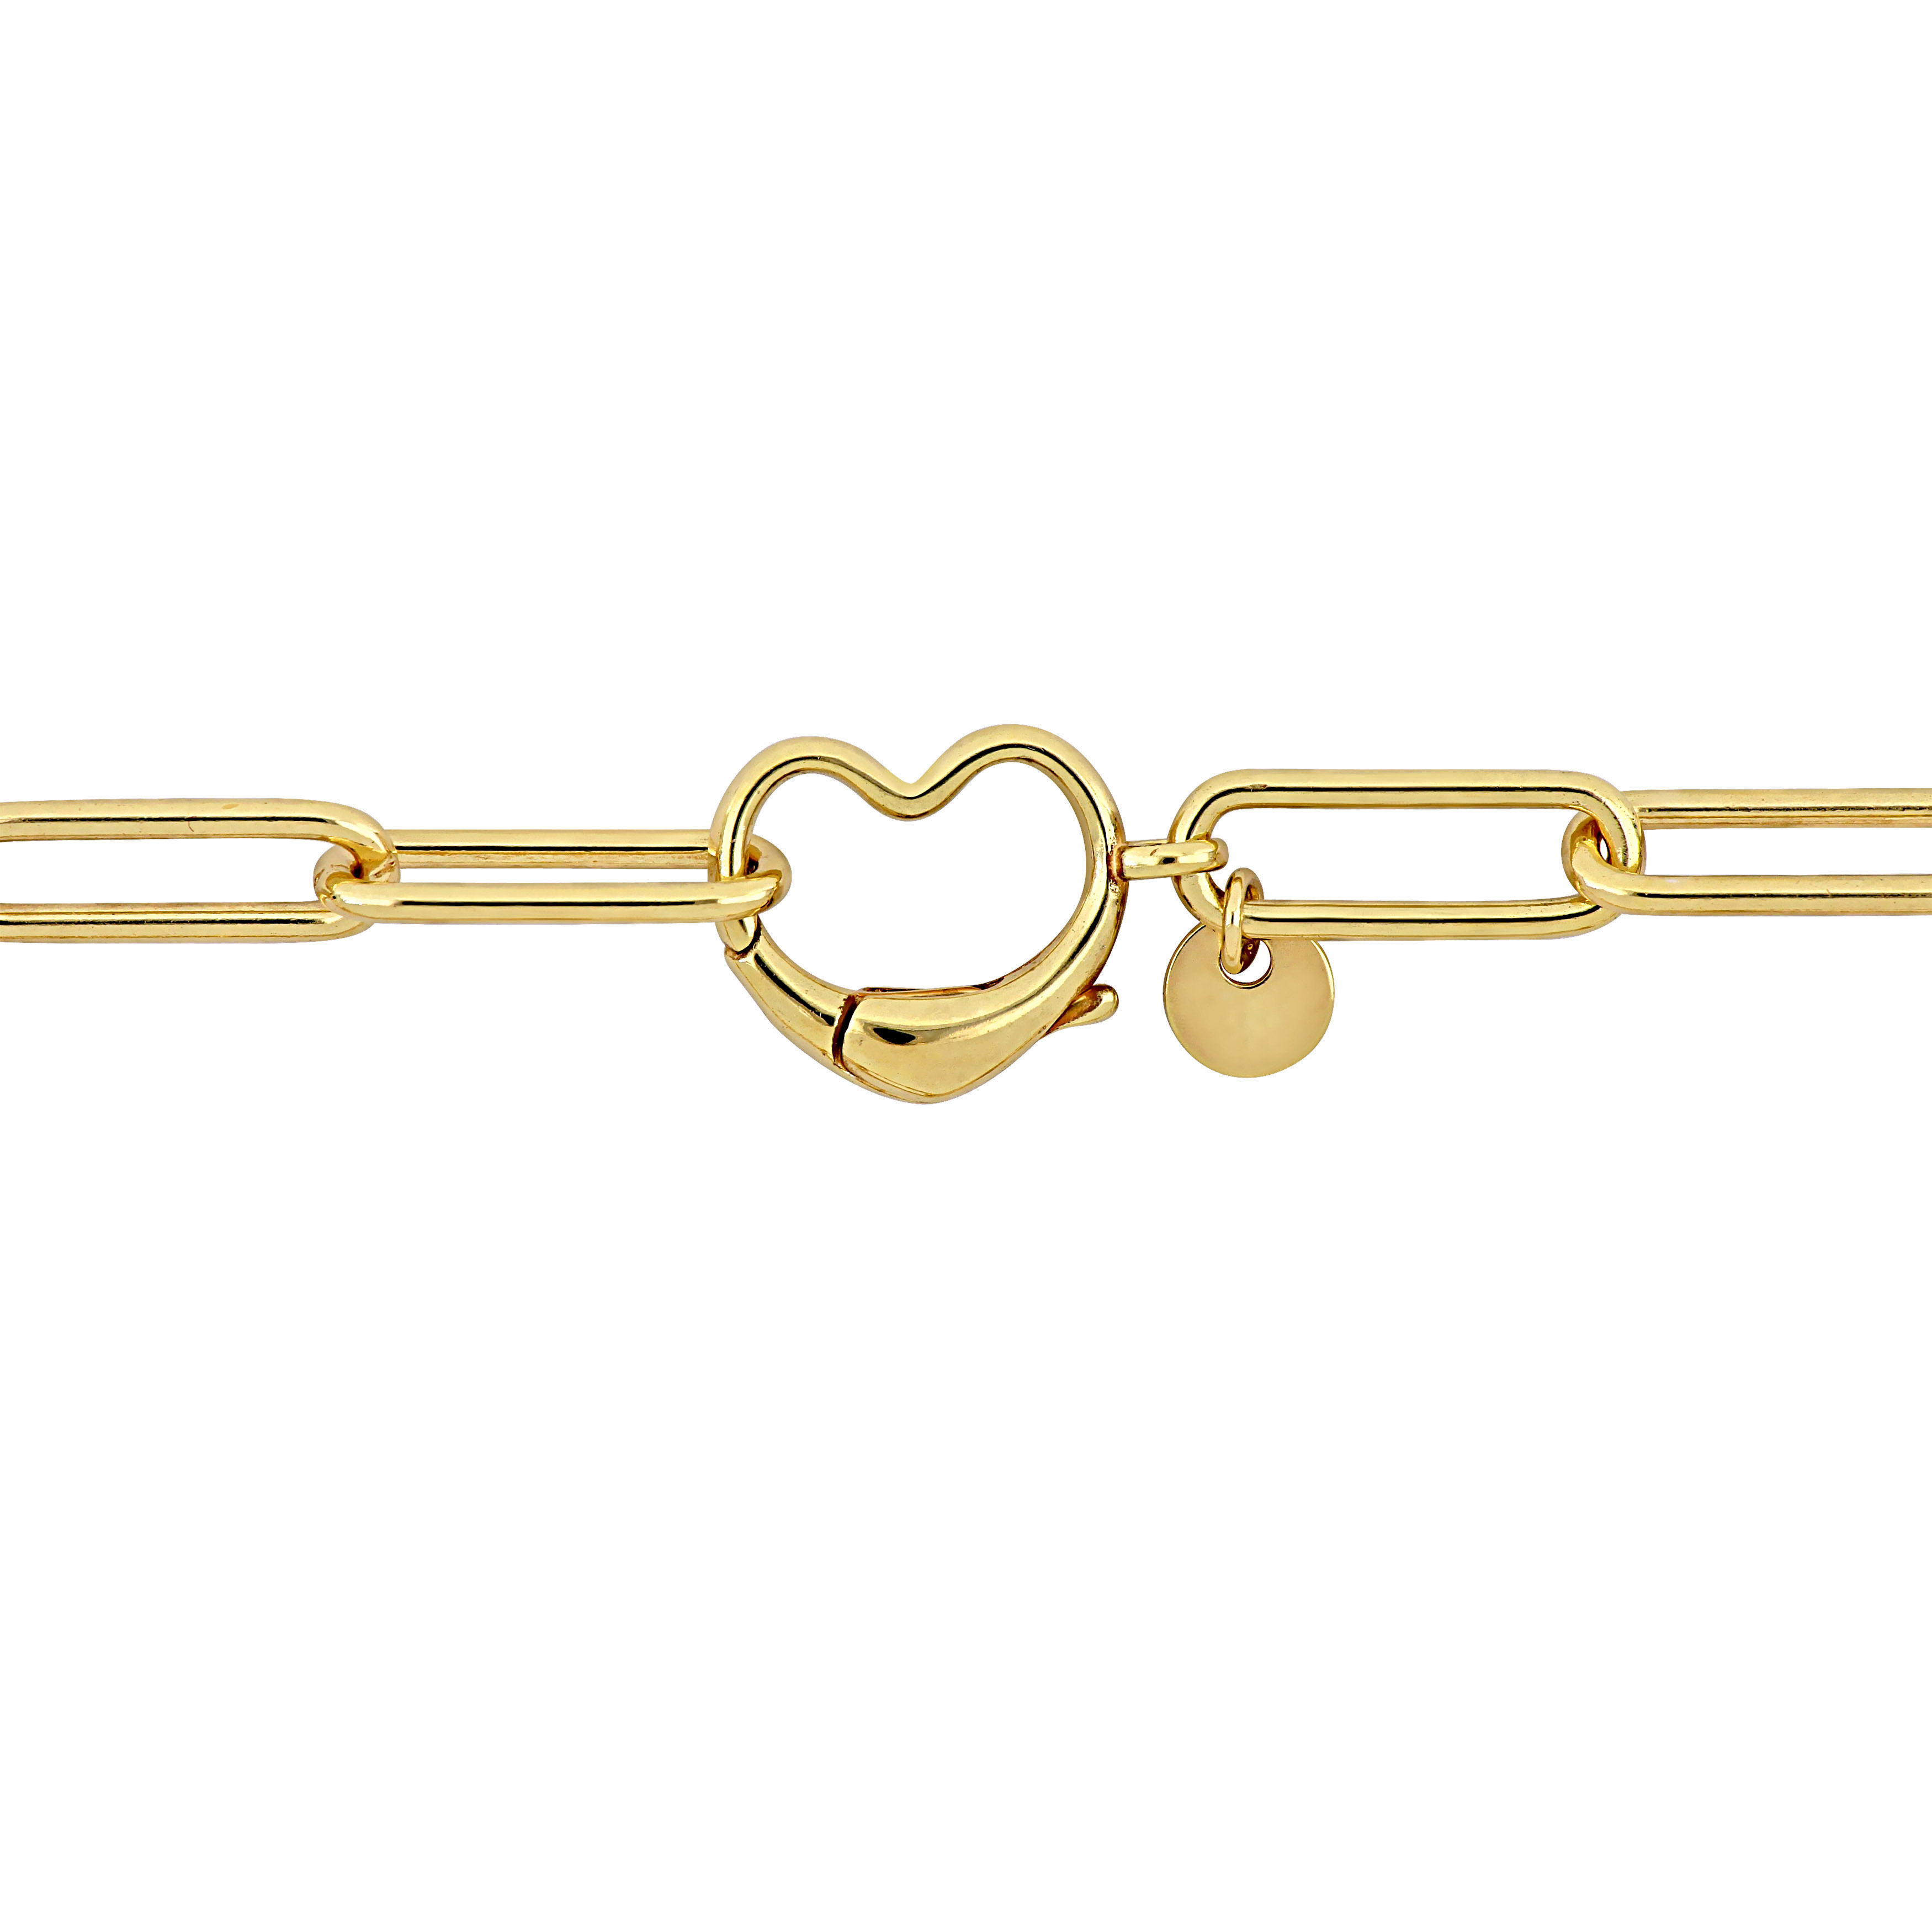 Heart Charm Paper Clip Link Bracelet in Yellow Plated Sterling Silver - 7 in.